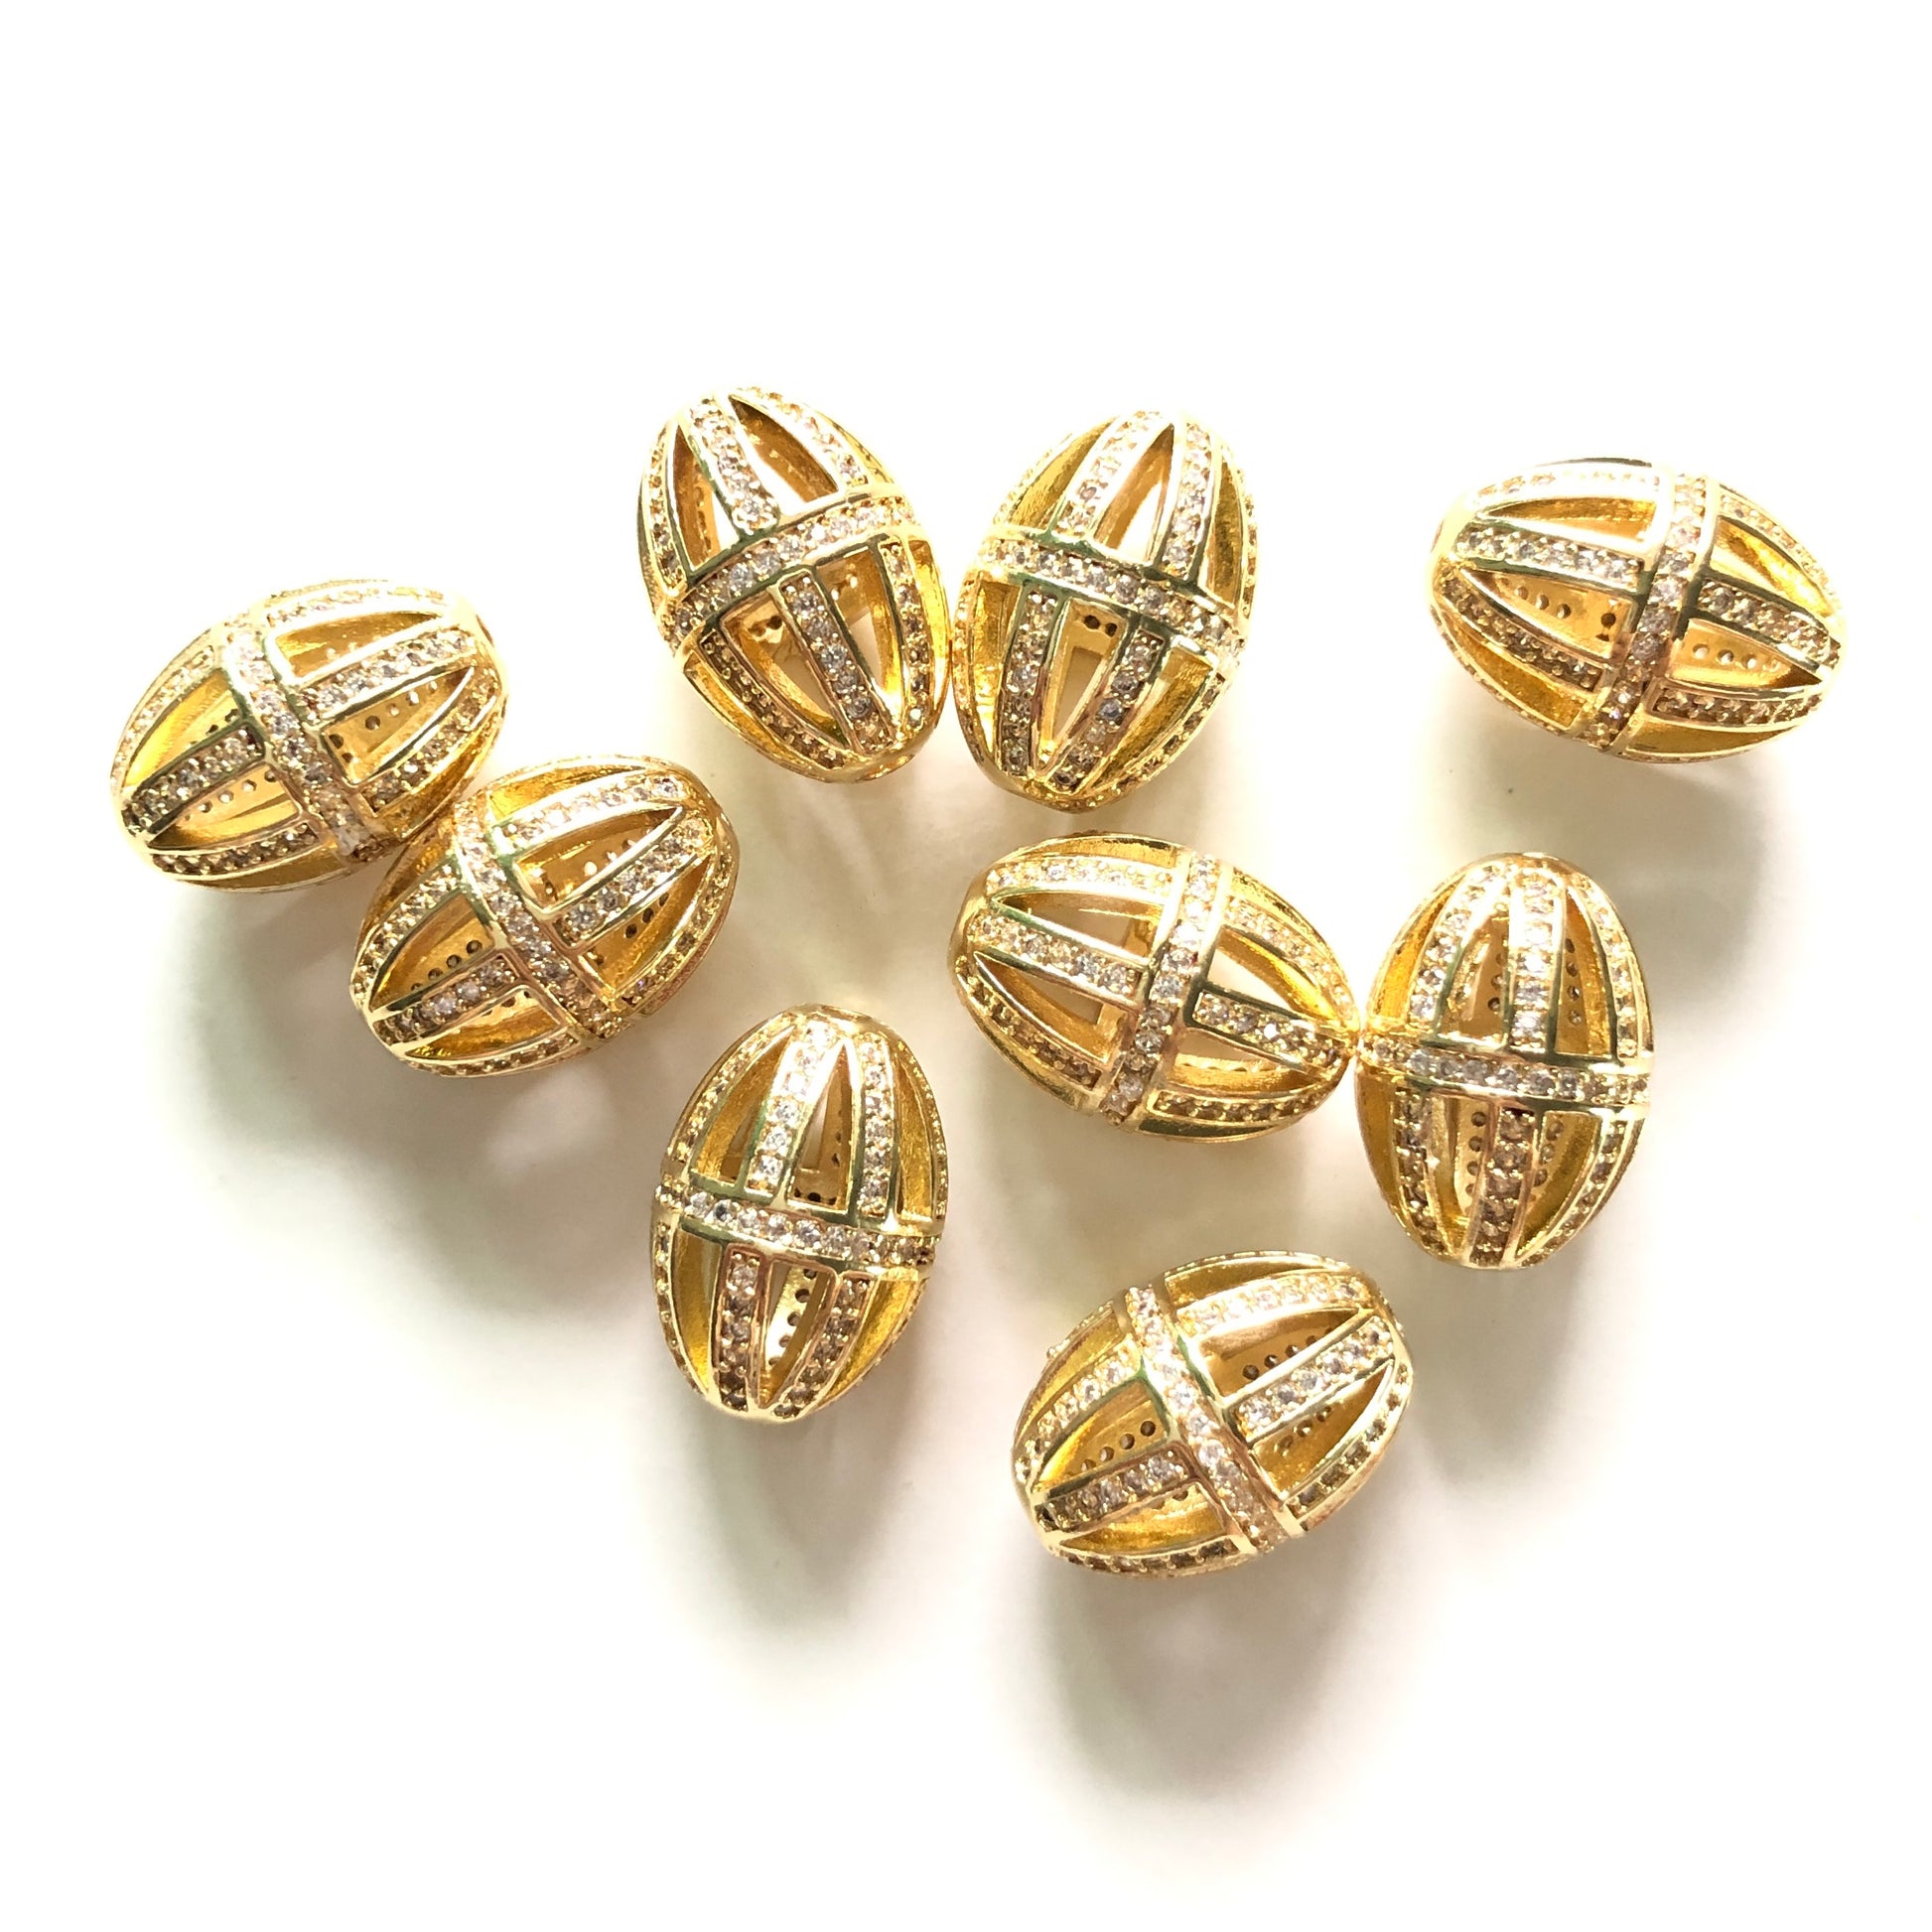 10pcs/lot 16.5*11.5mm CZ Paved Hollow Olive Beads Spacers Gold CZ Paved Spacers Oval Spacers Charms Beads Beyond